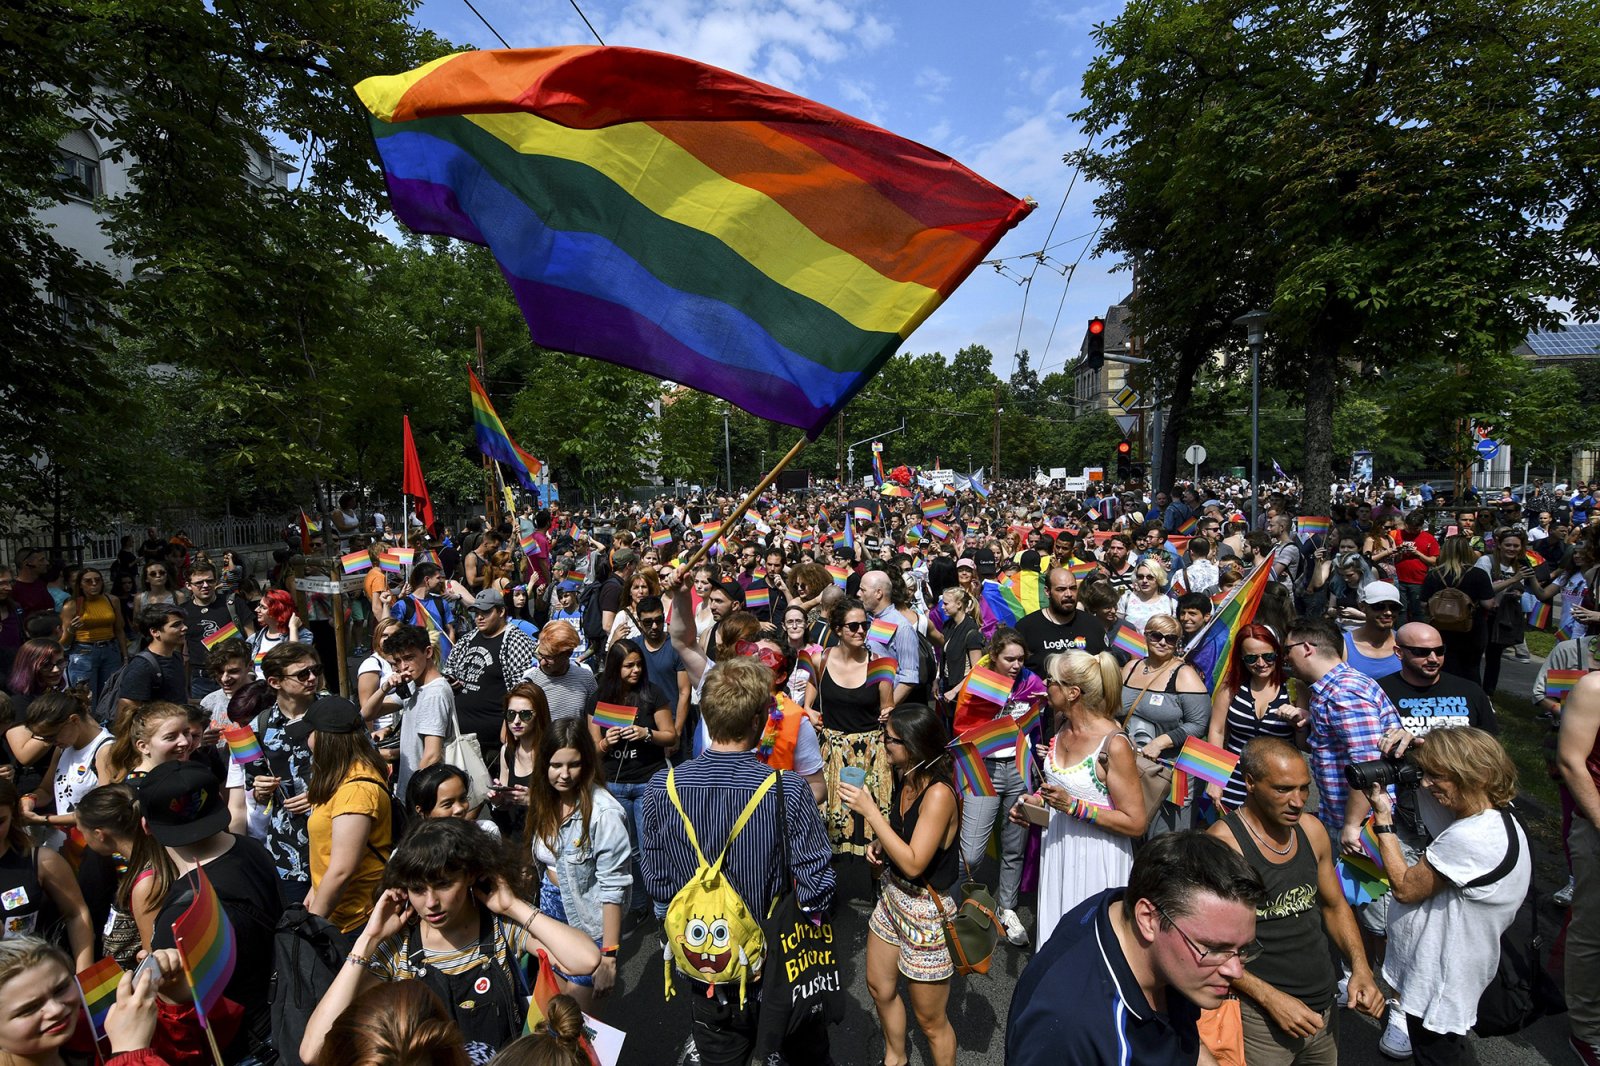 Hungarian Opinion: Budapest Pride as an Opposition March